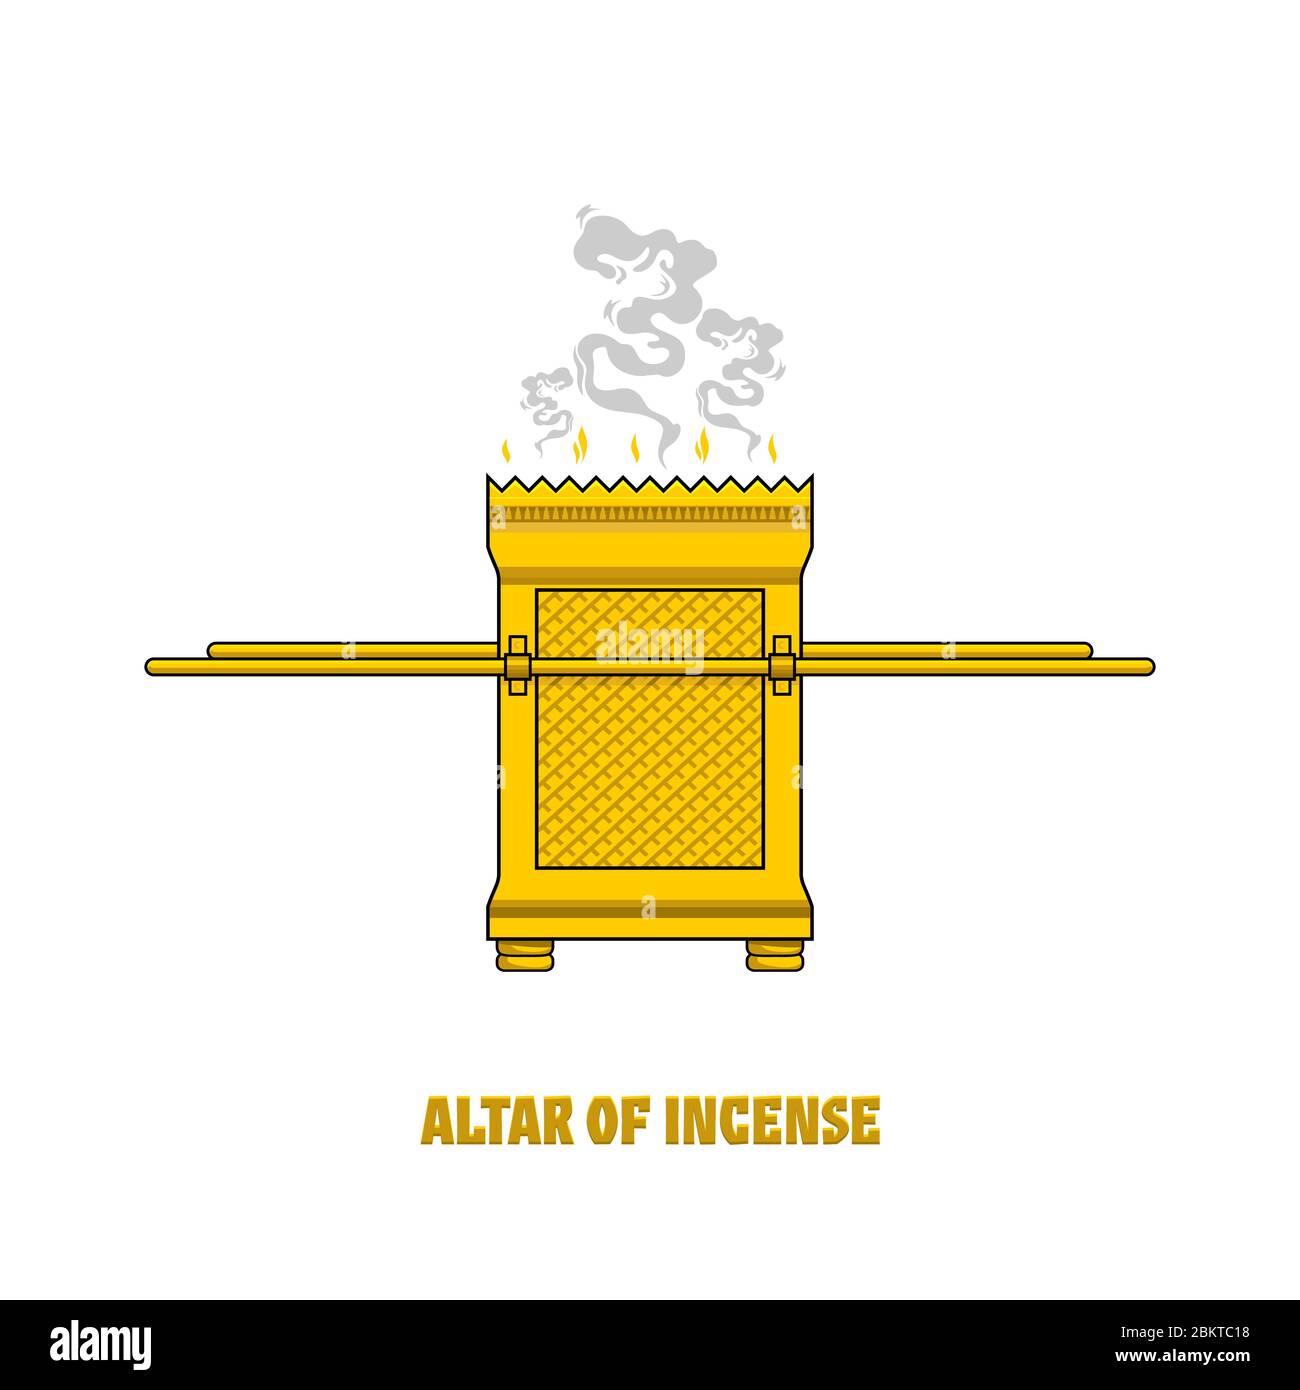 Altar of incense israel Cut Out Stock Images & Pictures - Alamy